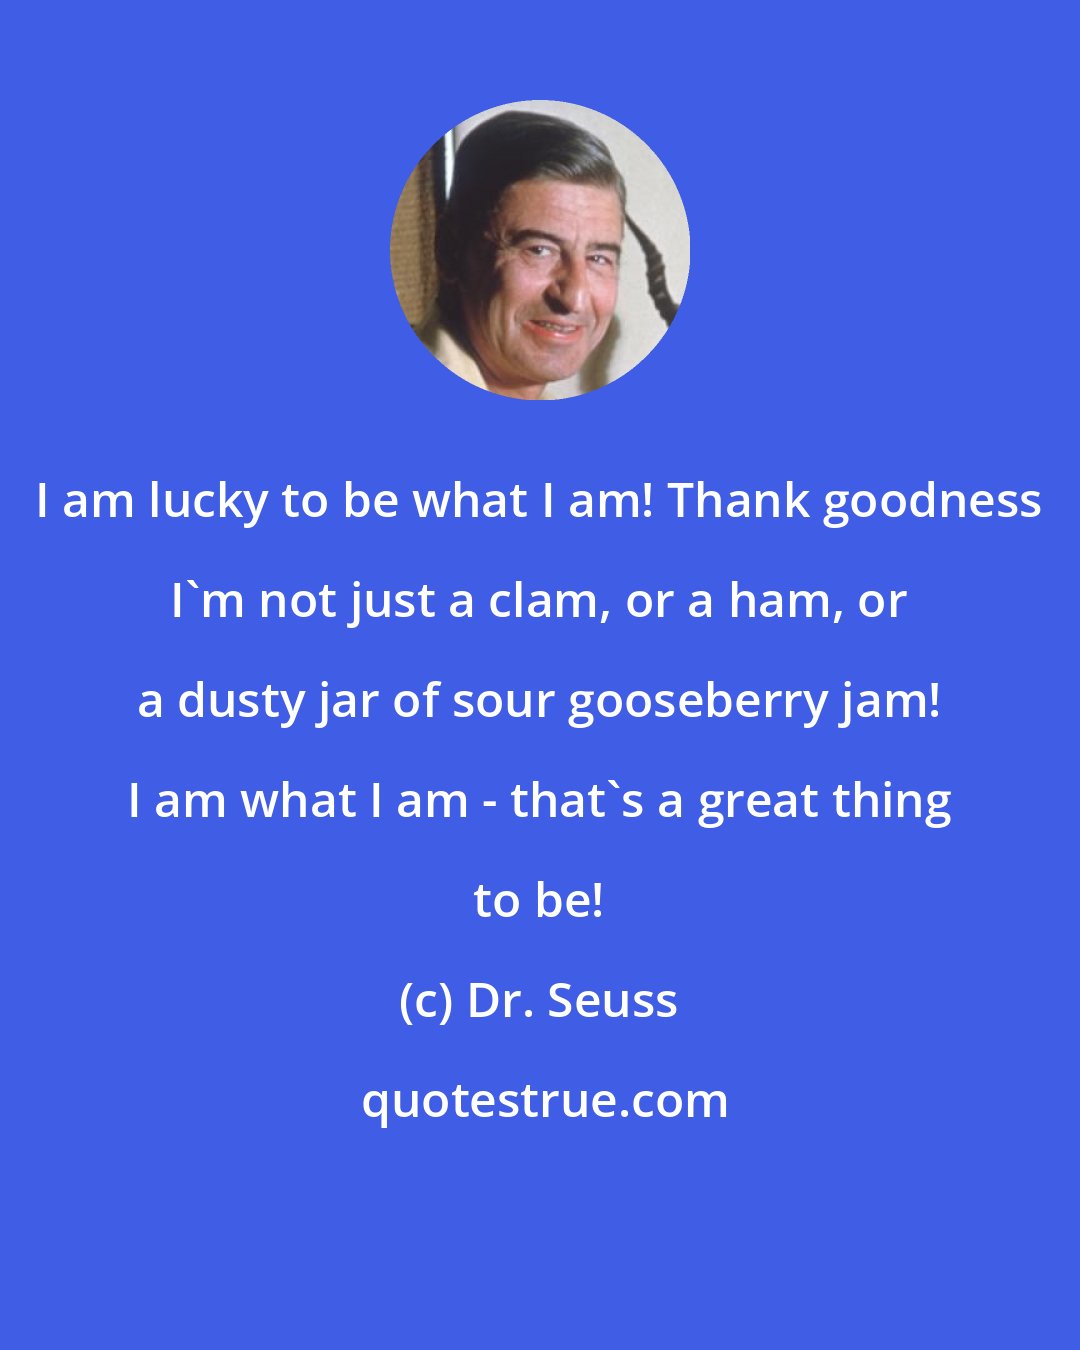 Dr. Seuss: I am lucky to be what I am! Thank goodness I'm not just a clam, or a ham, or a dusty jar of sour gooseberry jam! I am what I am - that's a great thing to be!